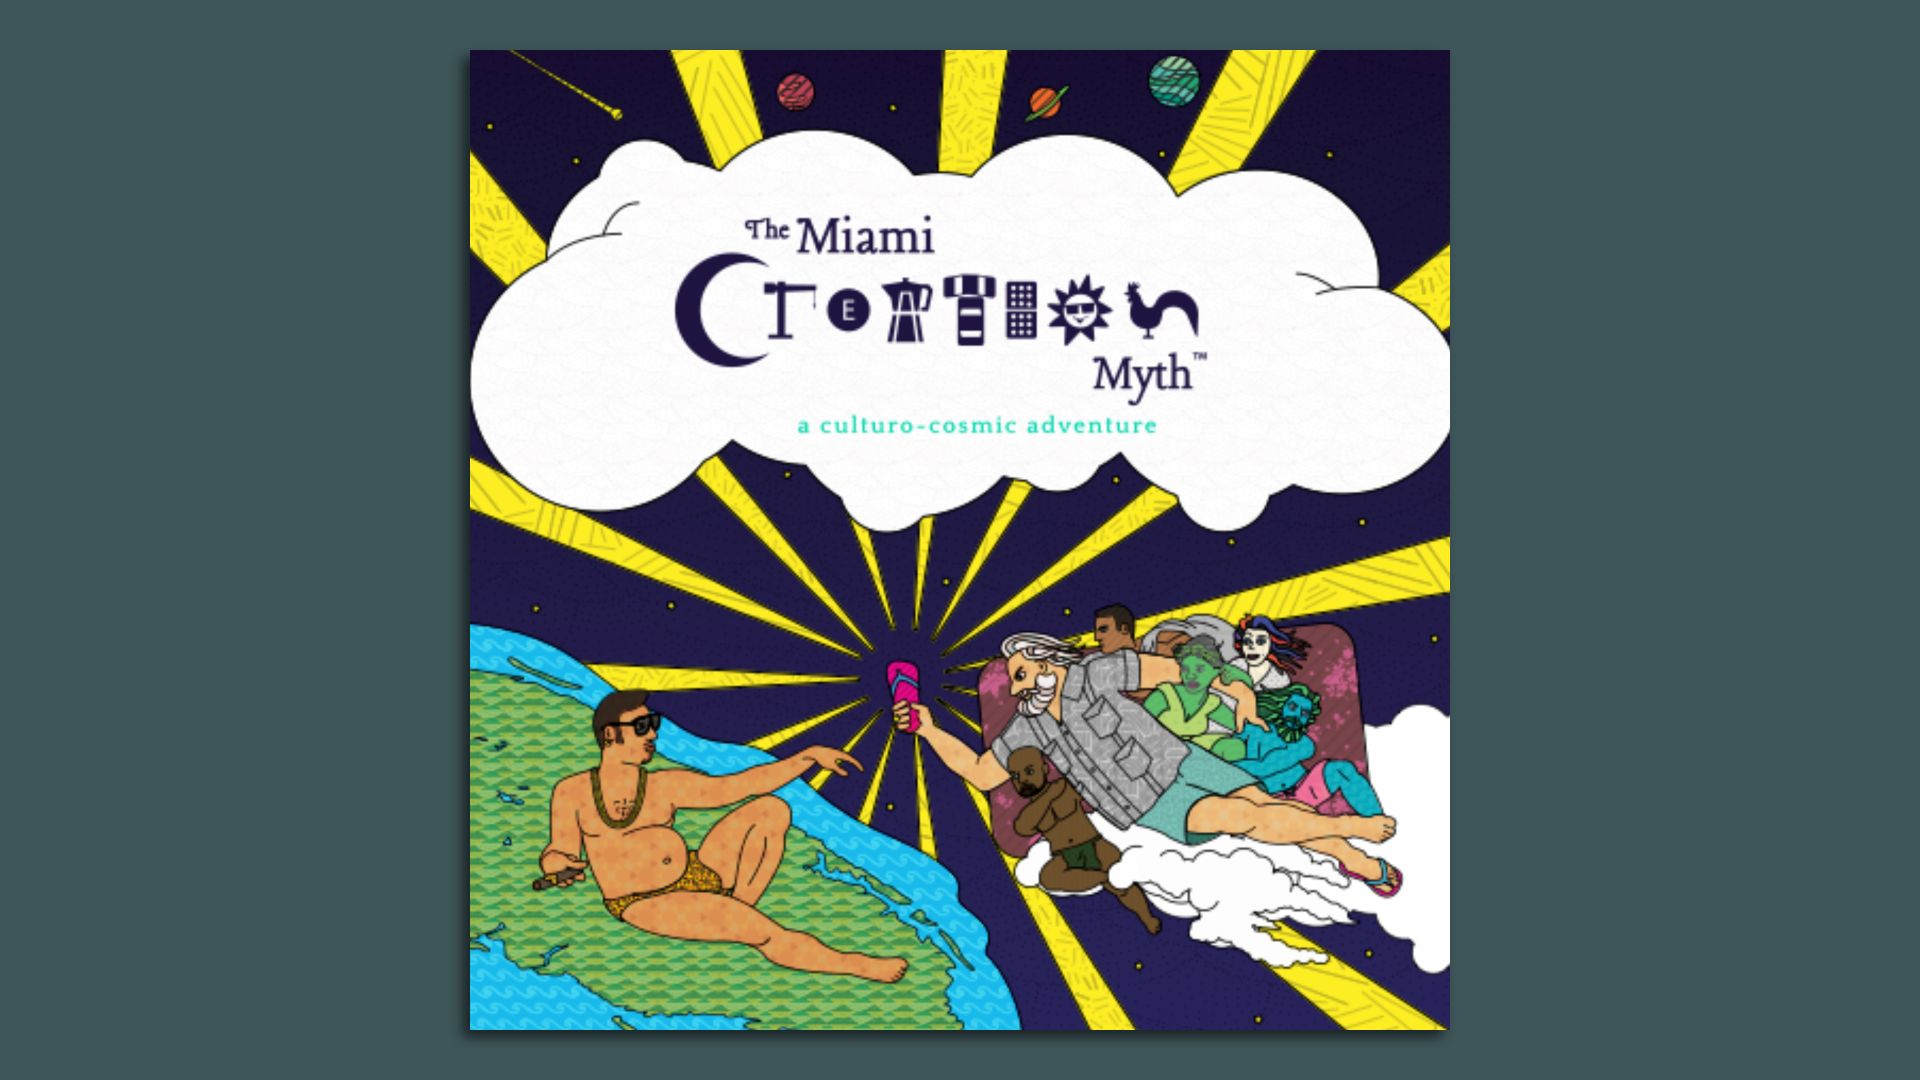 Explore Miami's creation story in new satirical book - Axios